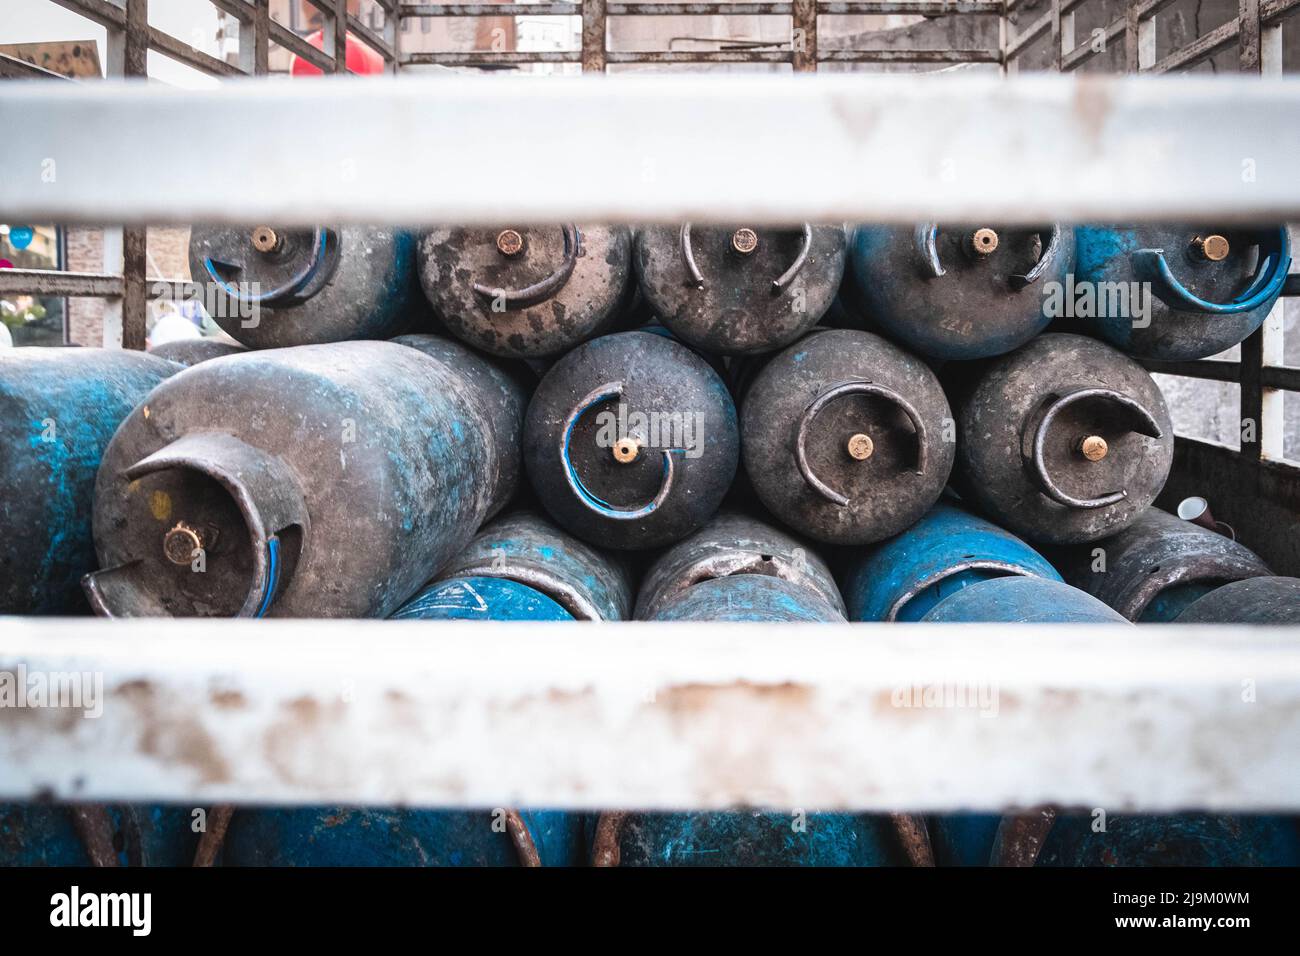 Many old propane gas bottles on truck Stock Photo